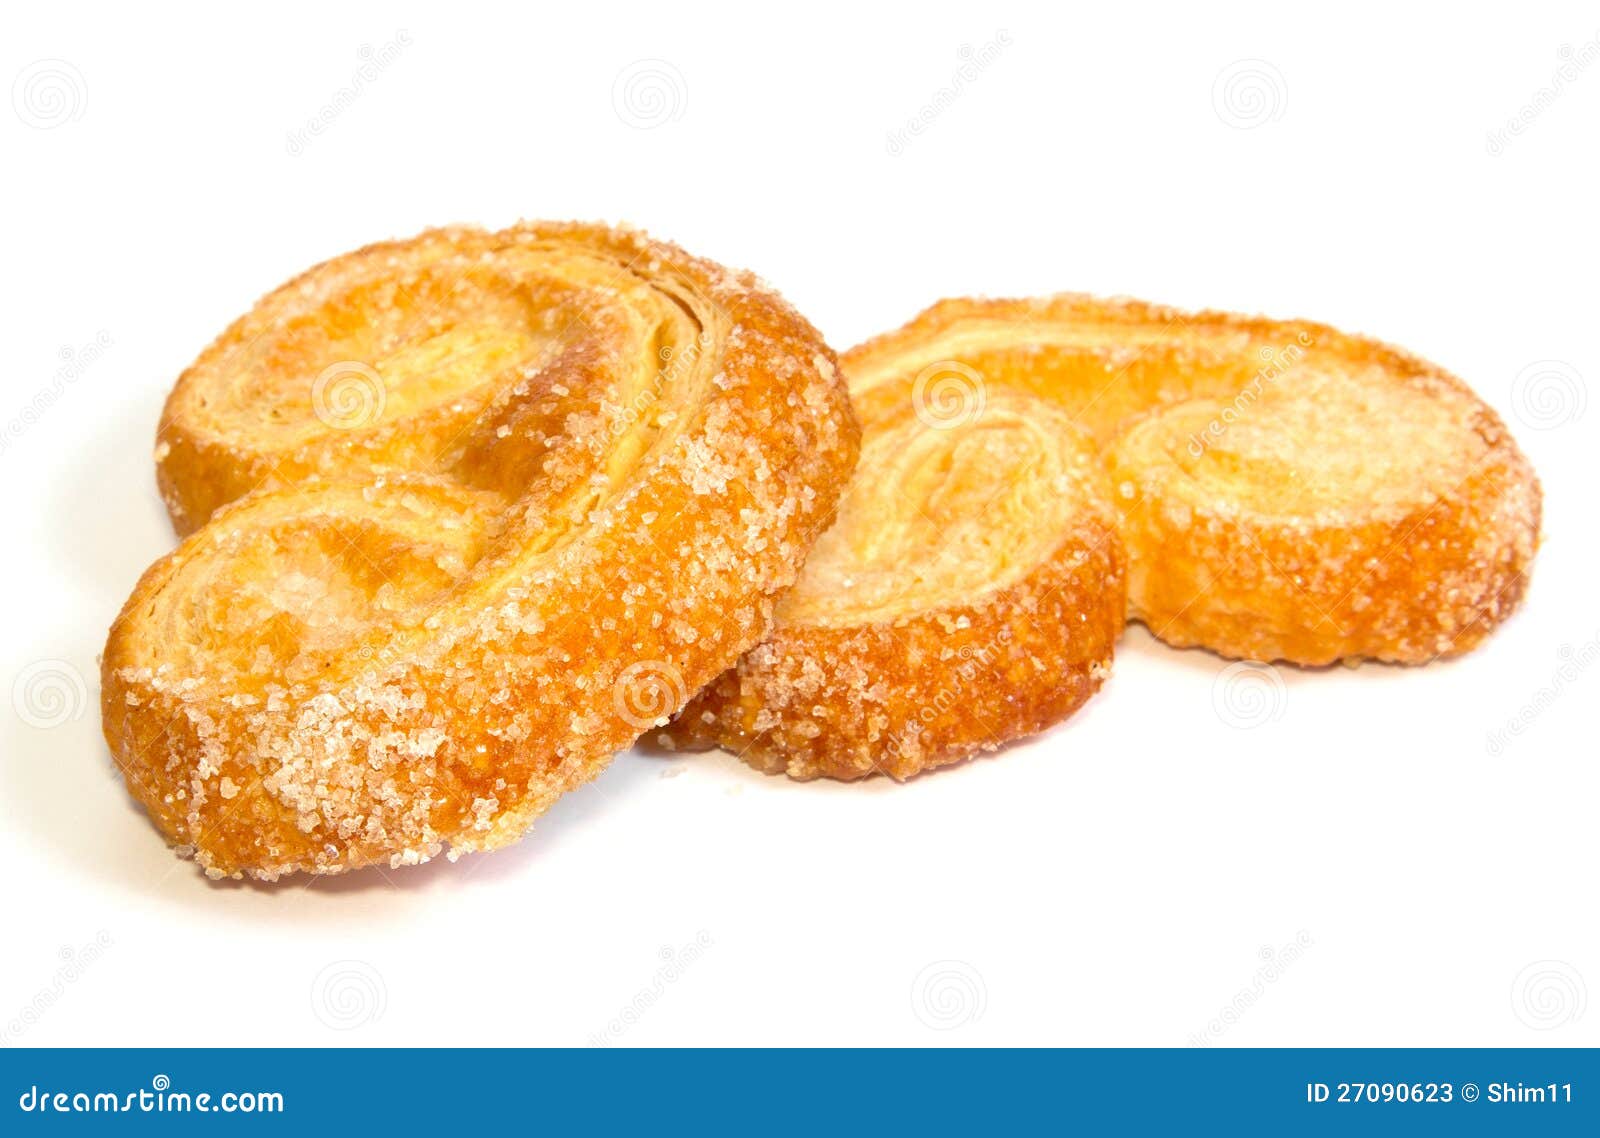 palmera (palmier) sweet puff pastry